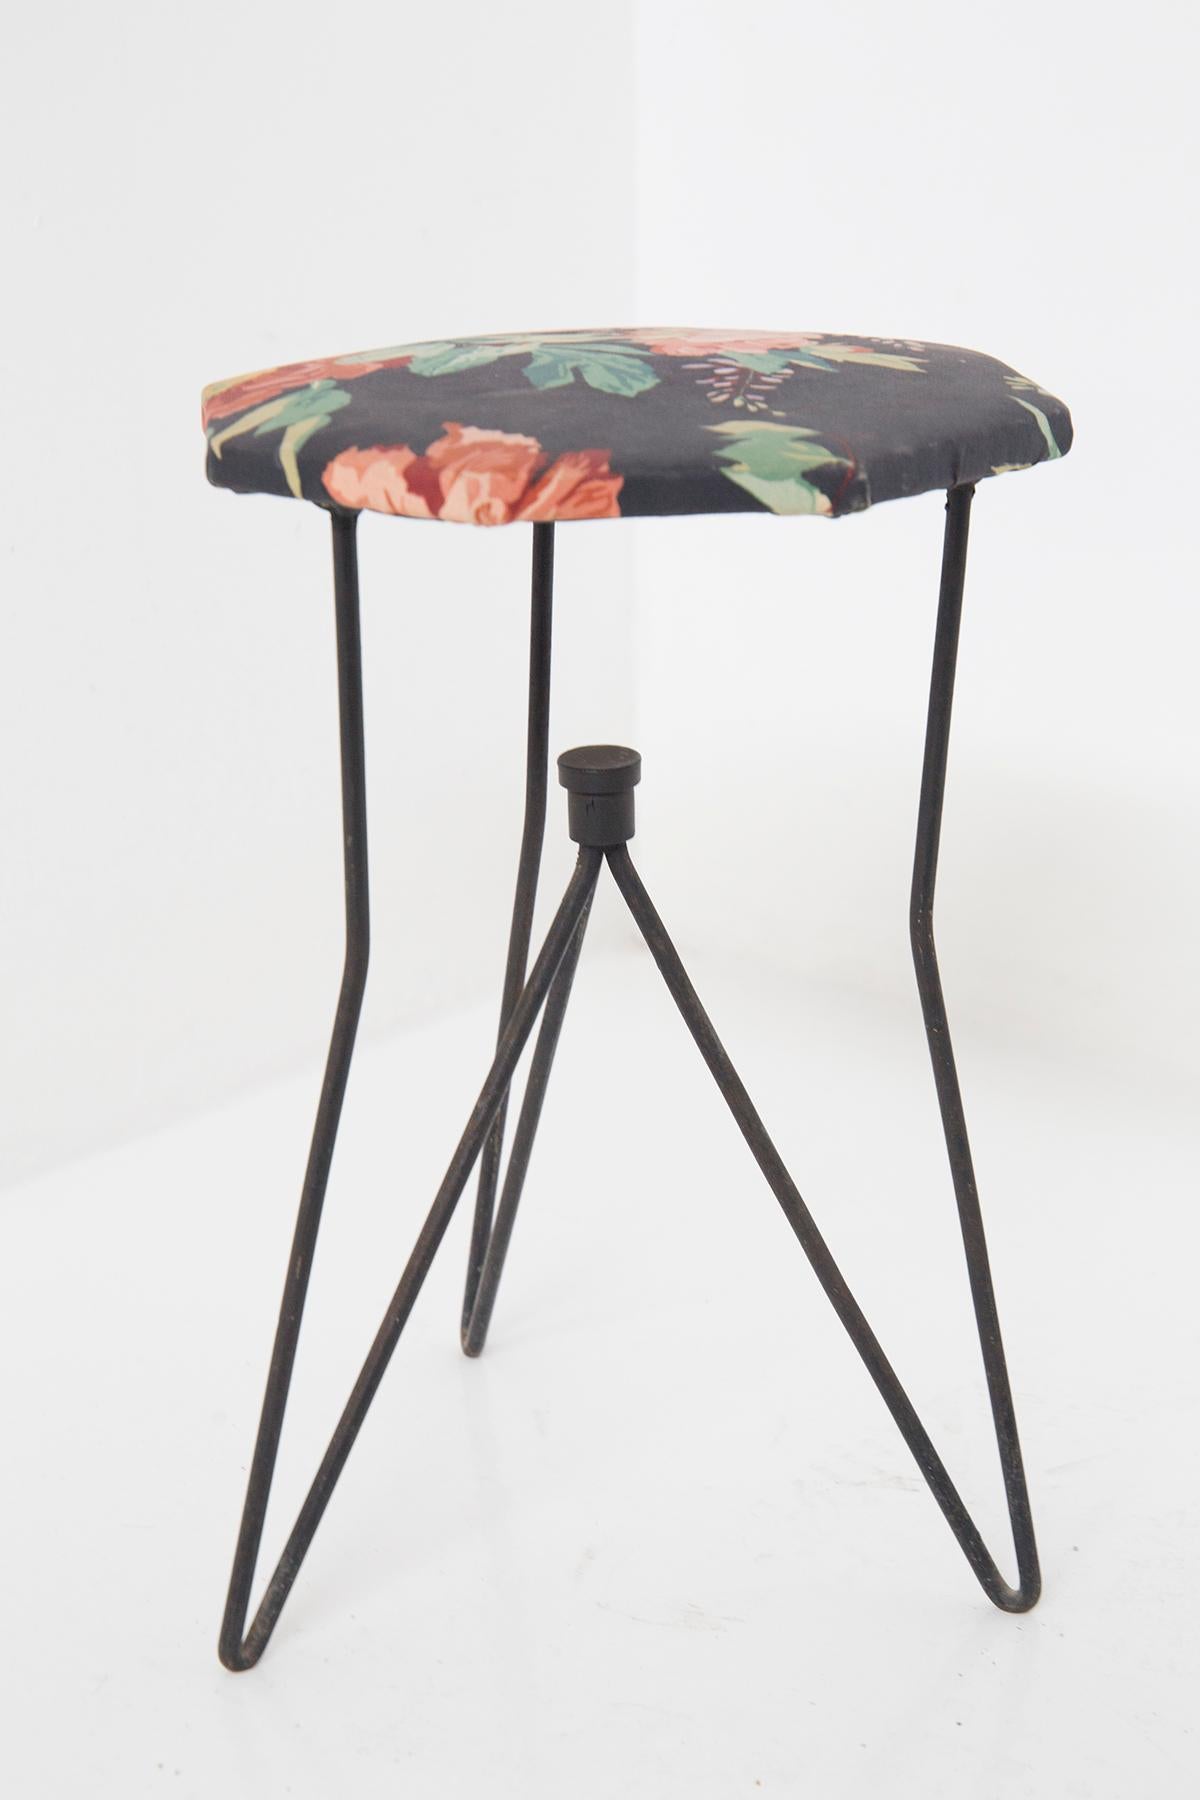 Vintage Metal and Fabric Floral Stools for Rima att. Gio Ponti In Good Condition For Sale In Milano, IT